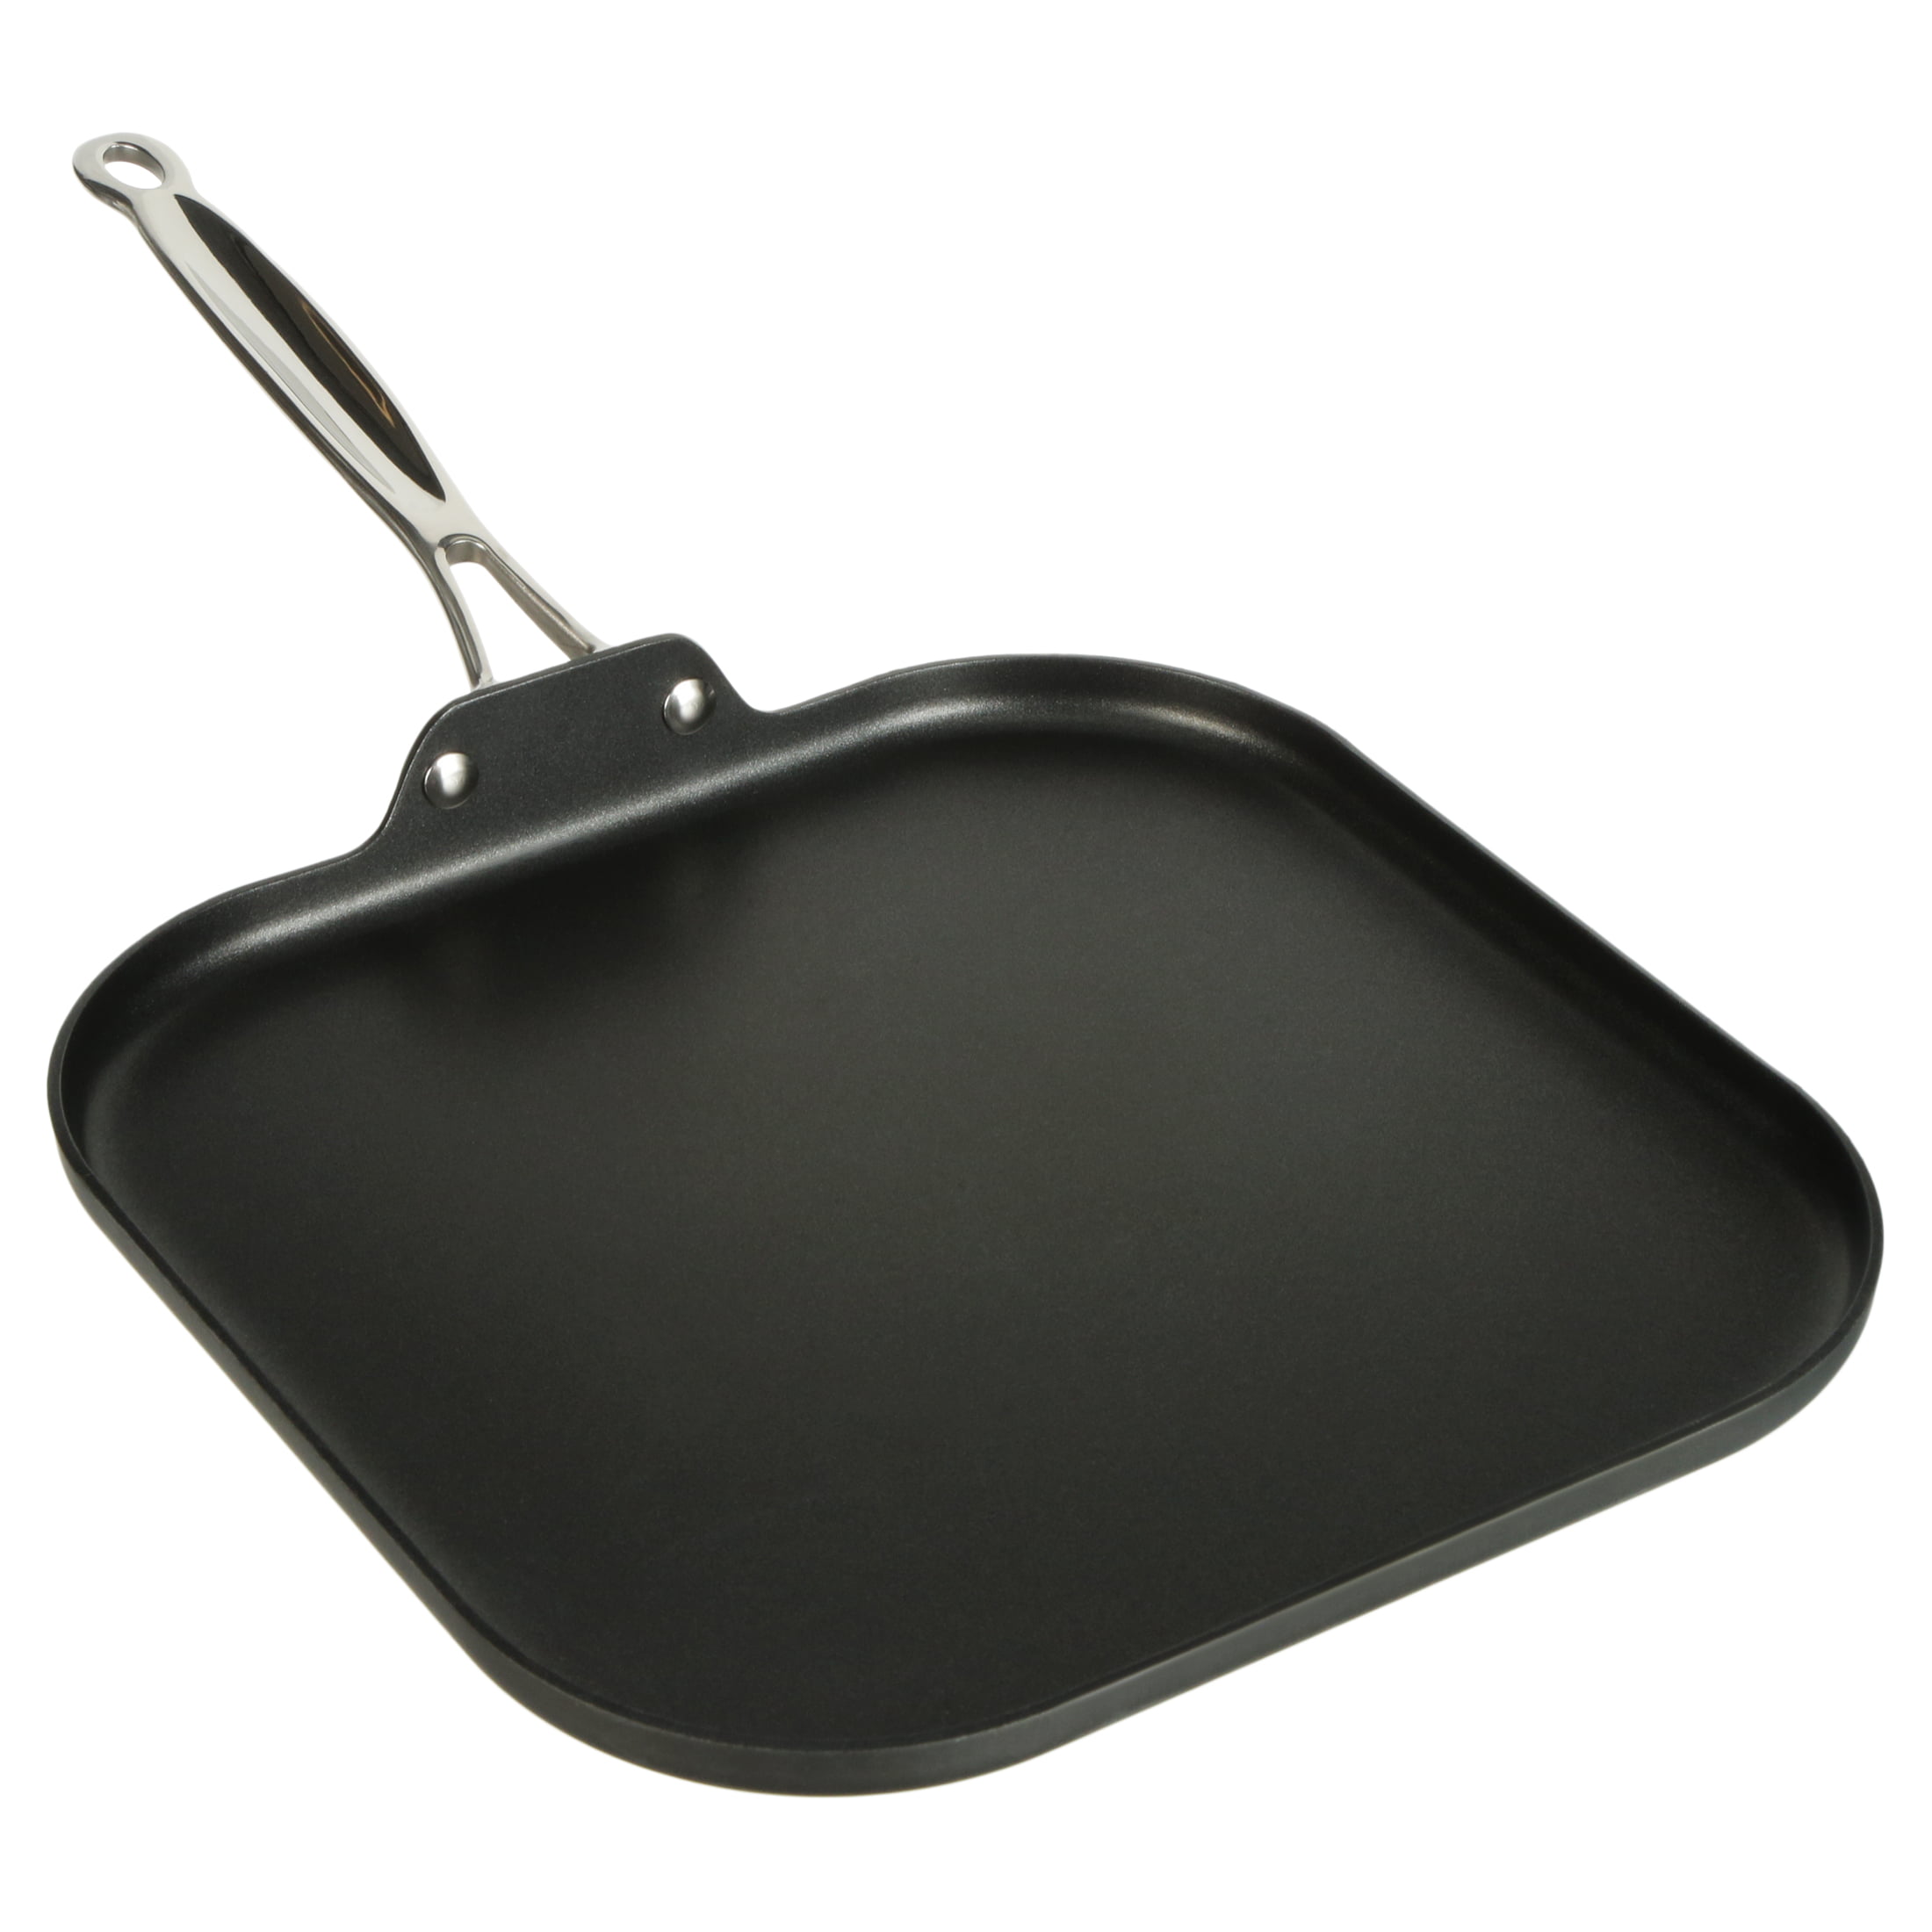 Cooks Standard Hard Anodized Nonstick Square Griddle Pan, 11 x 11-Inch,  Black, 11 INCH - City Market